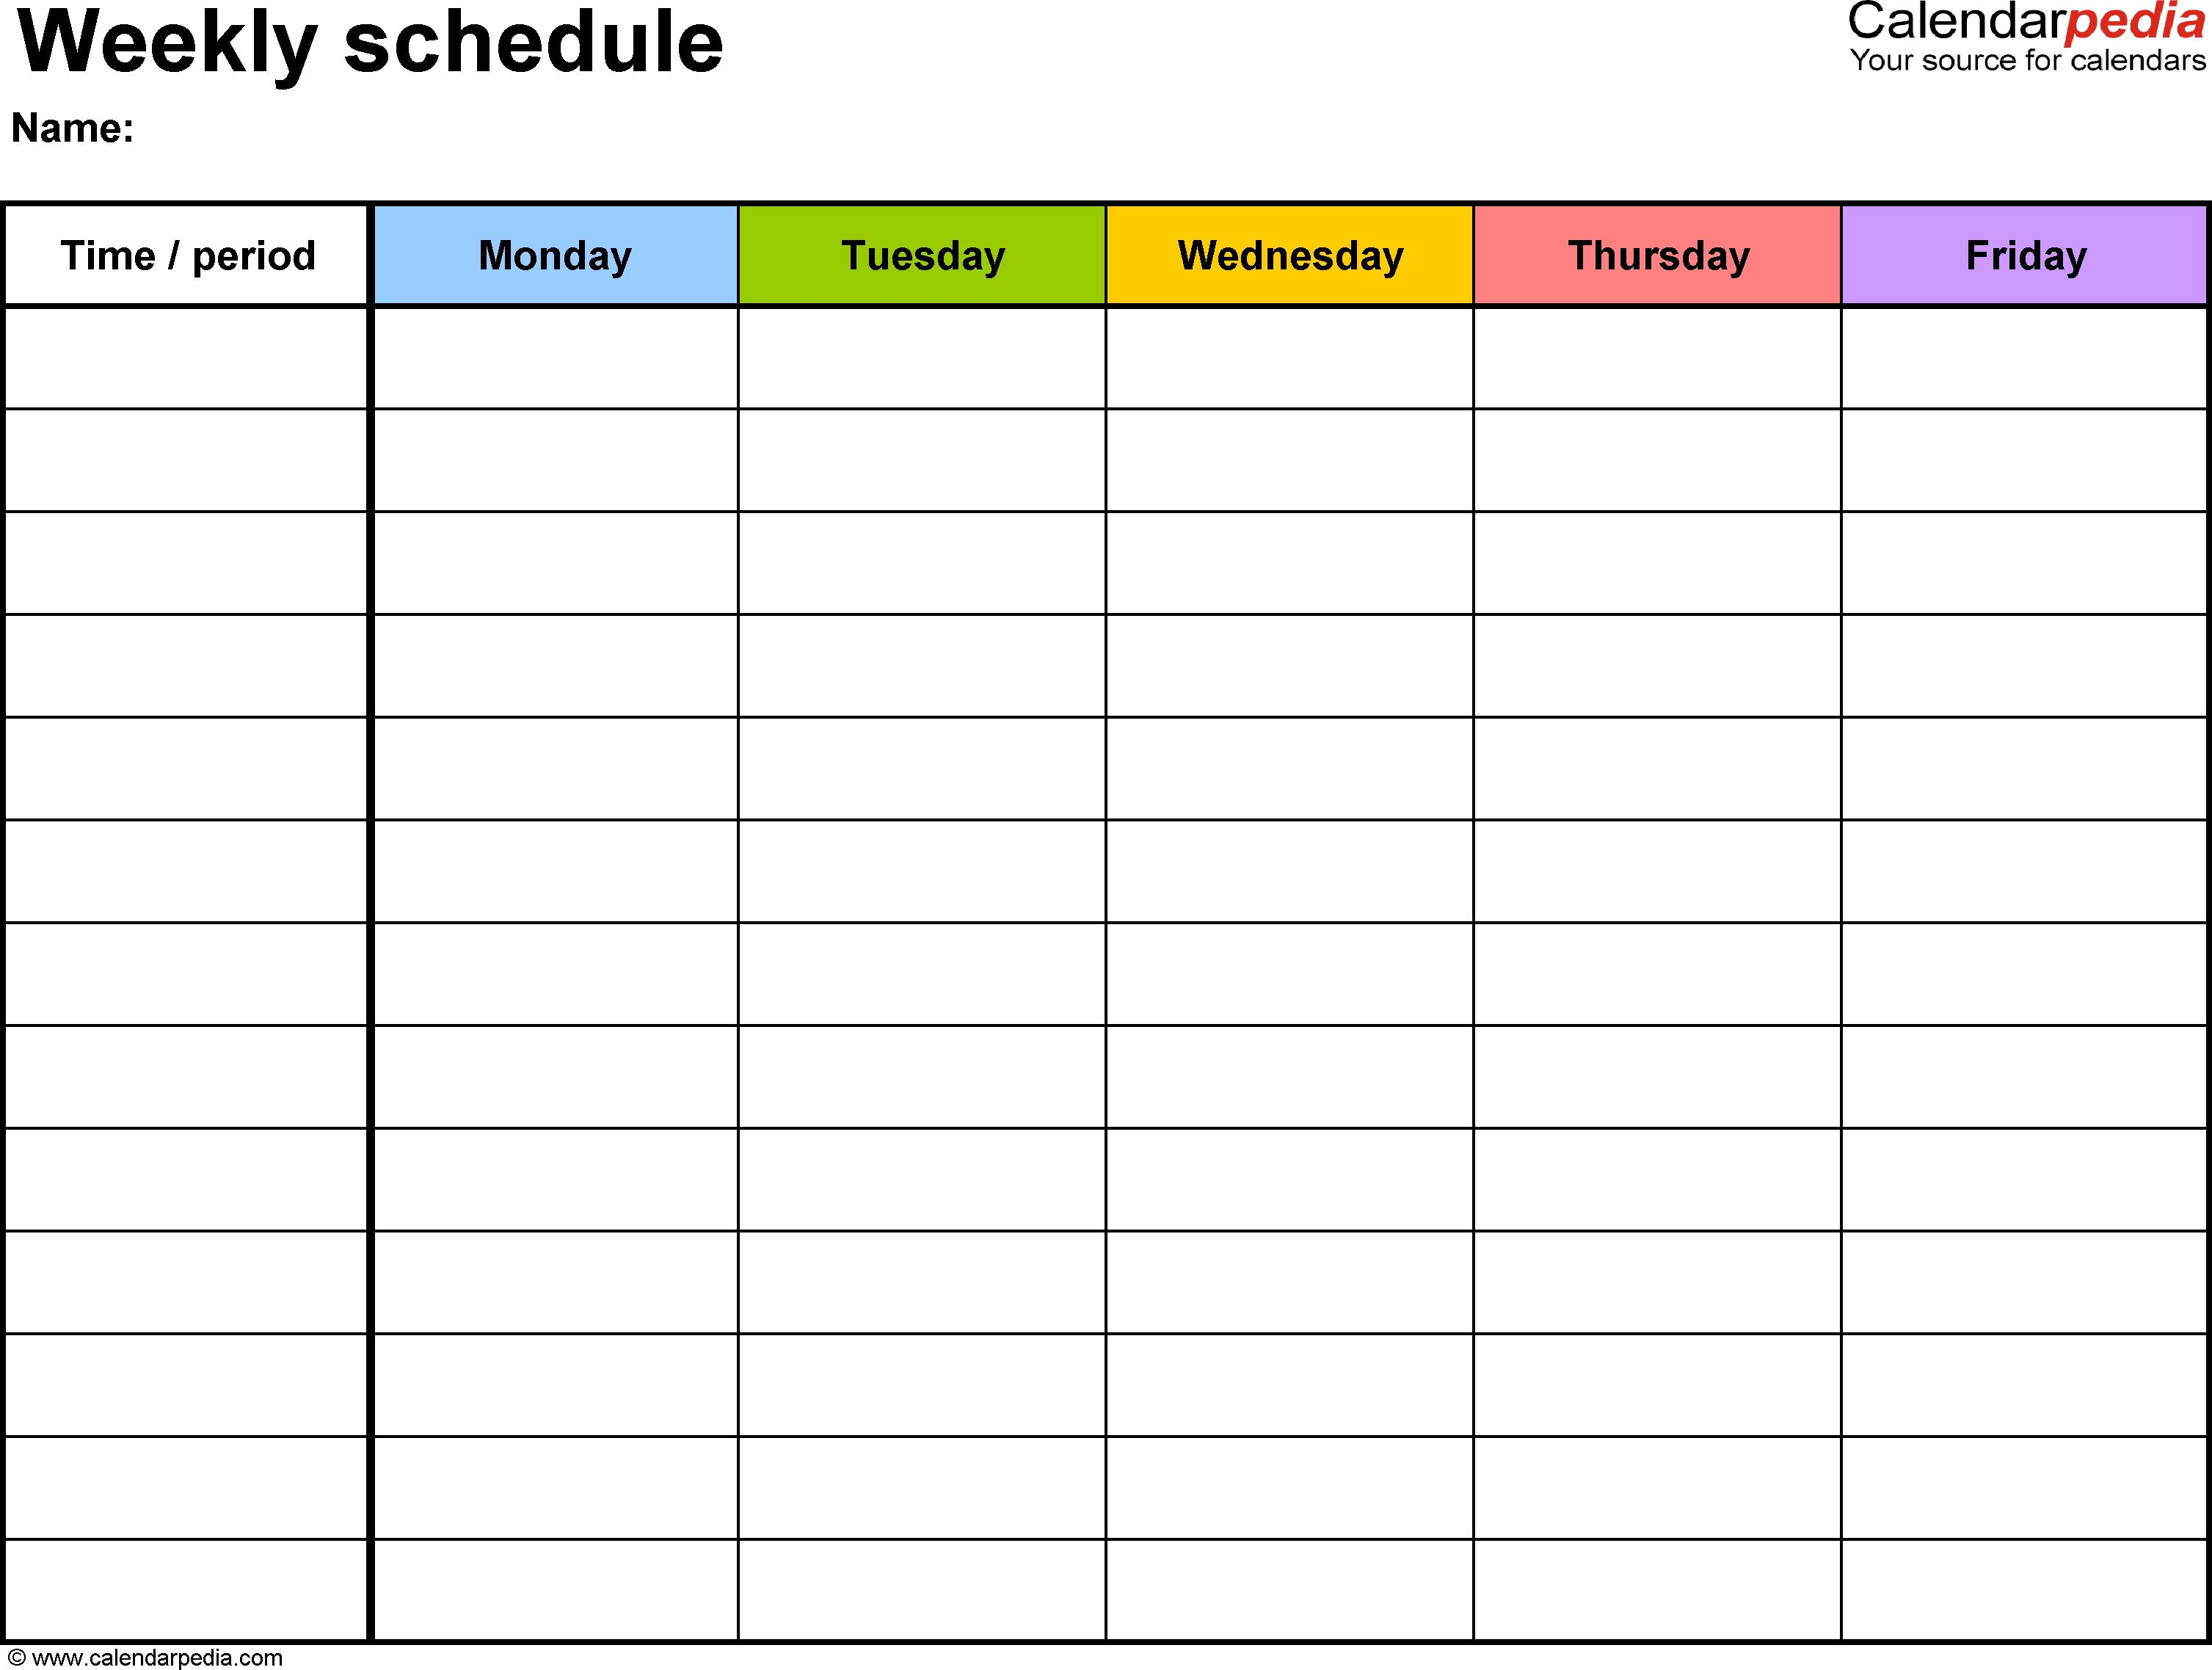 Free Weekly Schedule Templates For Word - 18 Templates 2 Month Calendar Template Word